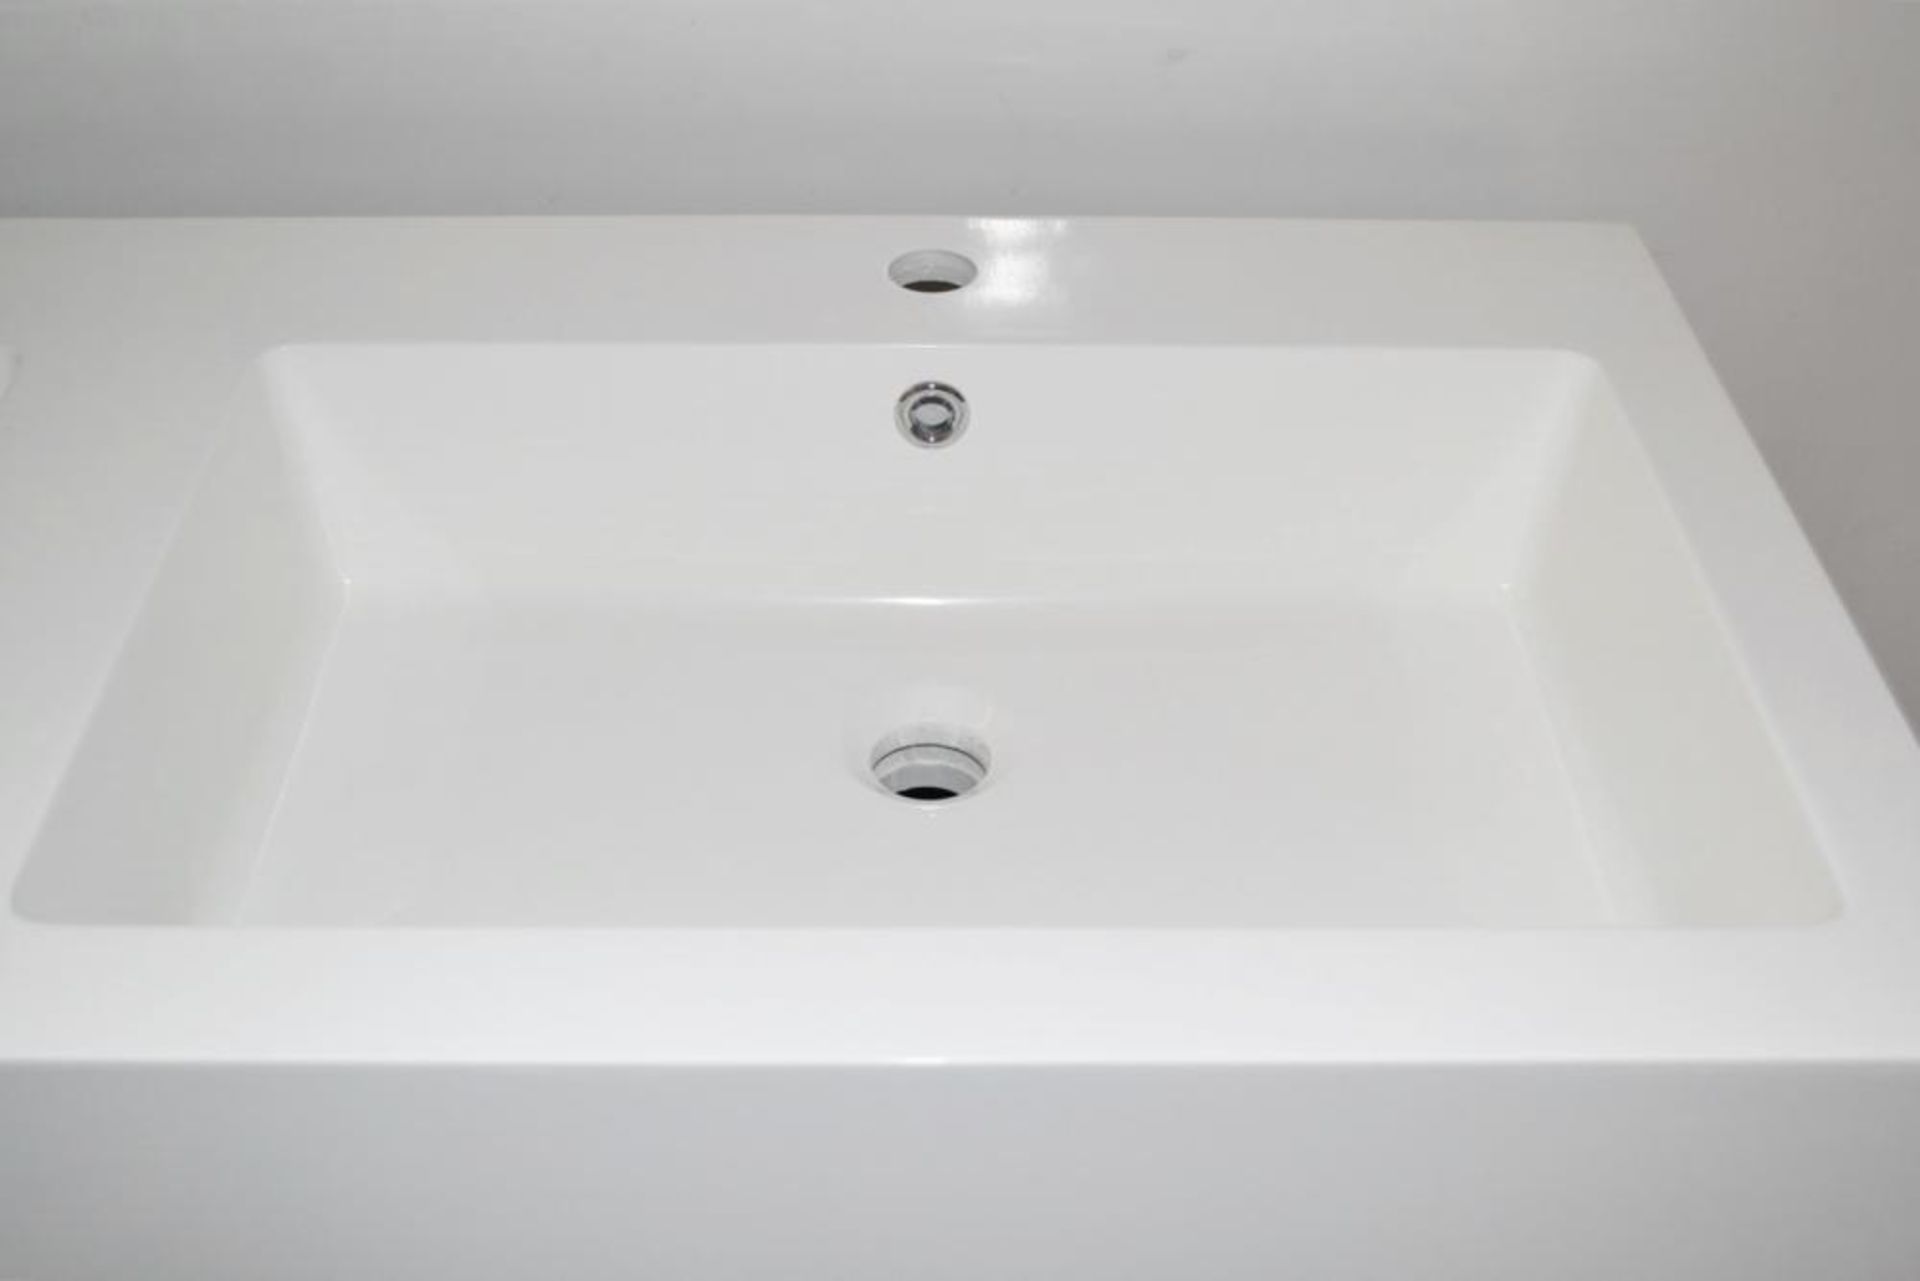 JOB LOT of 10 x Gloss White 1200mm 4-Door Double Basin Freestanding Bathroom Cabinet - New & Boxed - Image 5 of 7